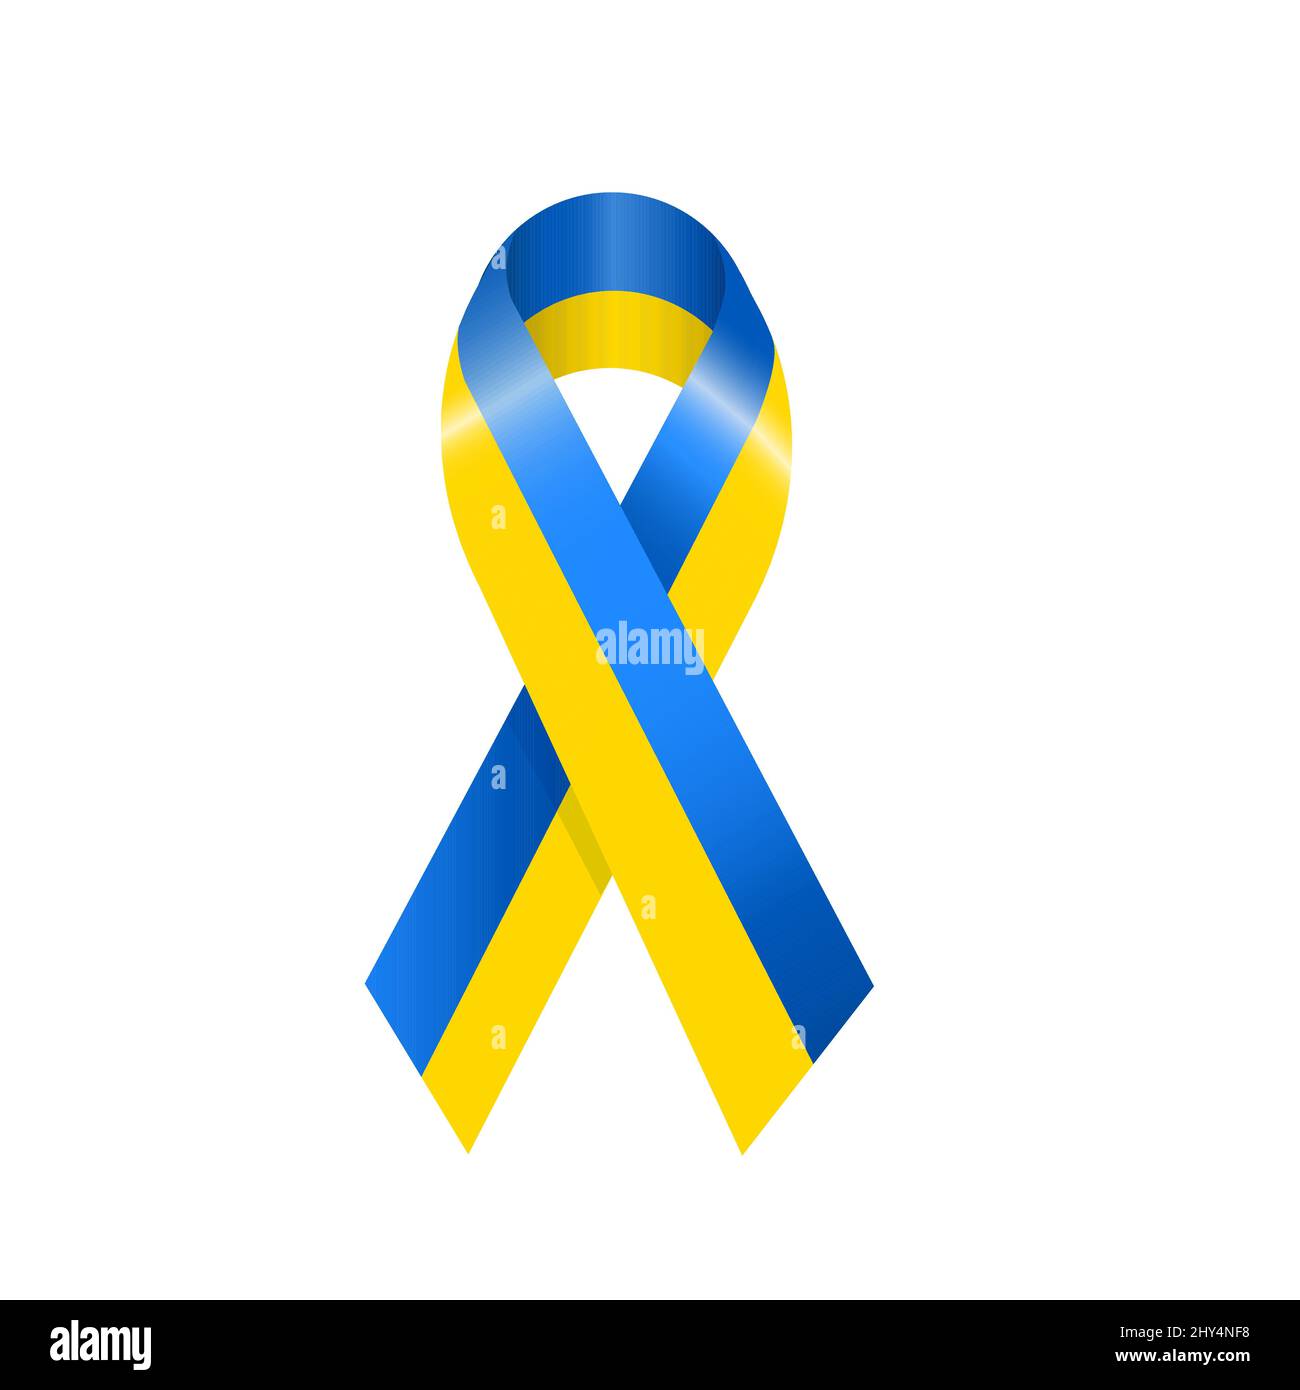 Ribbon flag of Ukraine. Vector illustration of flag of Ukraine ribbon in blue and yellow colors. Symbol of independence and freedom for Ukraine isolat Stock Vector